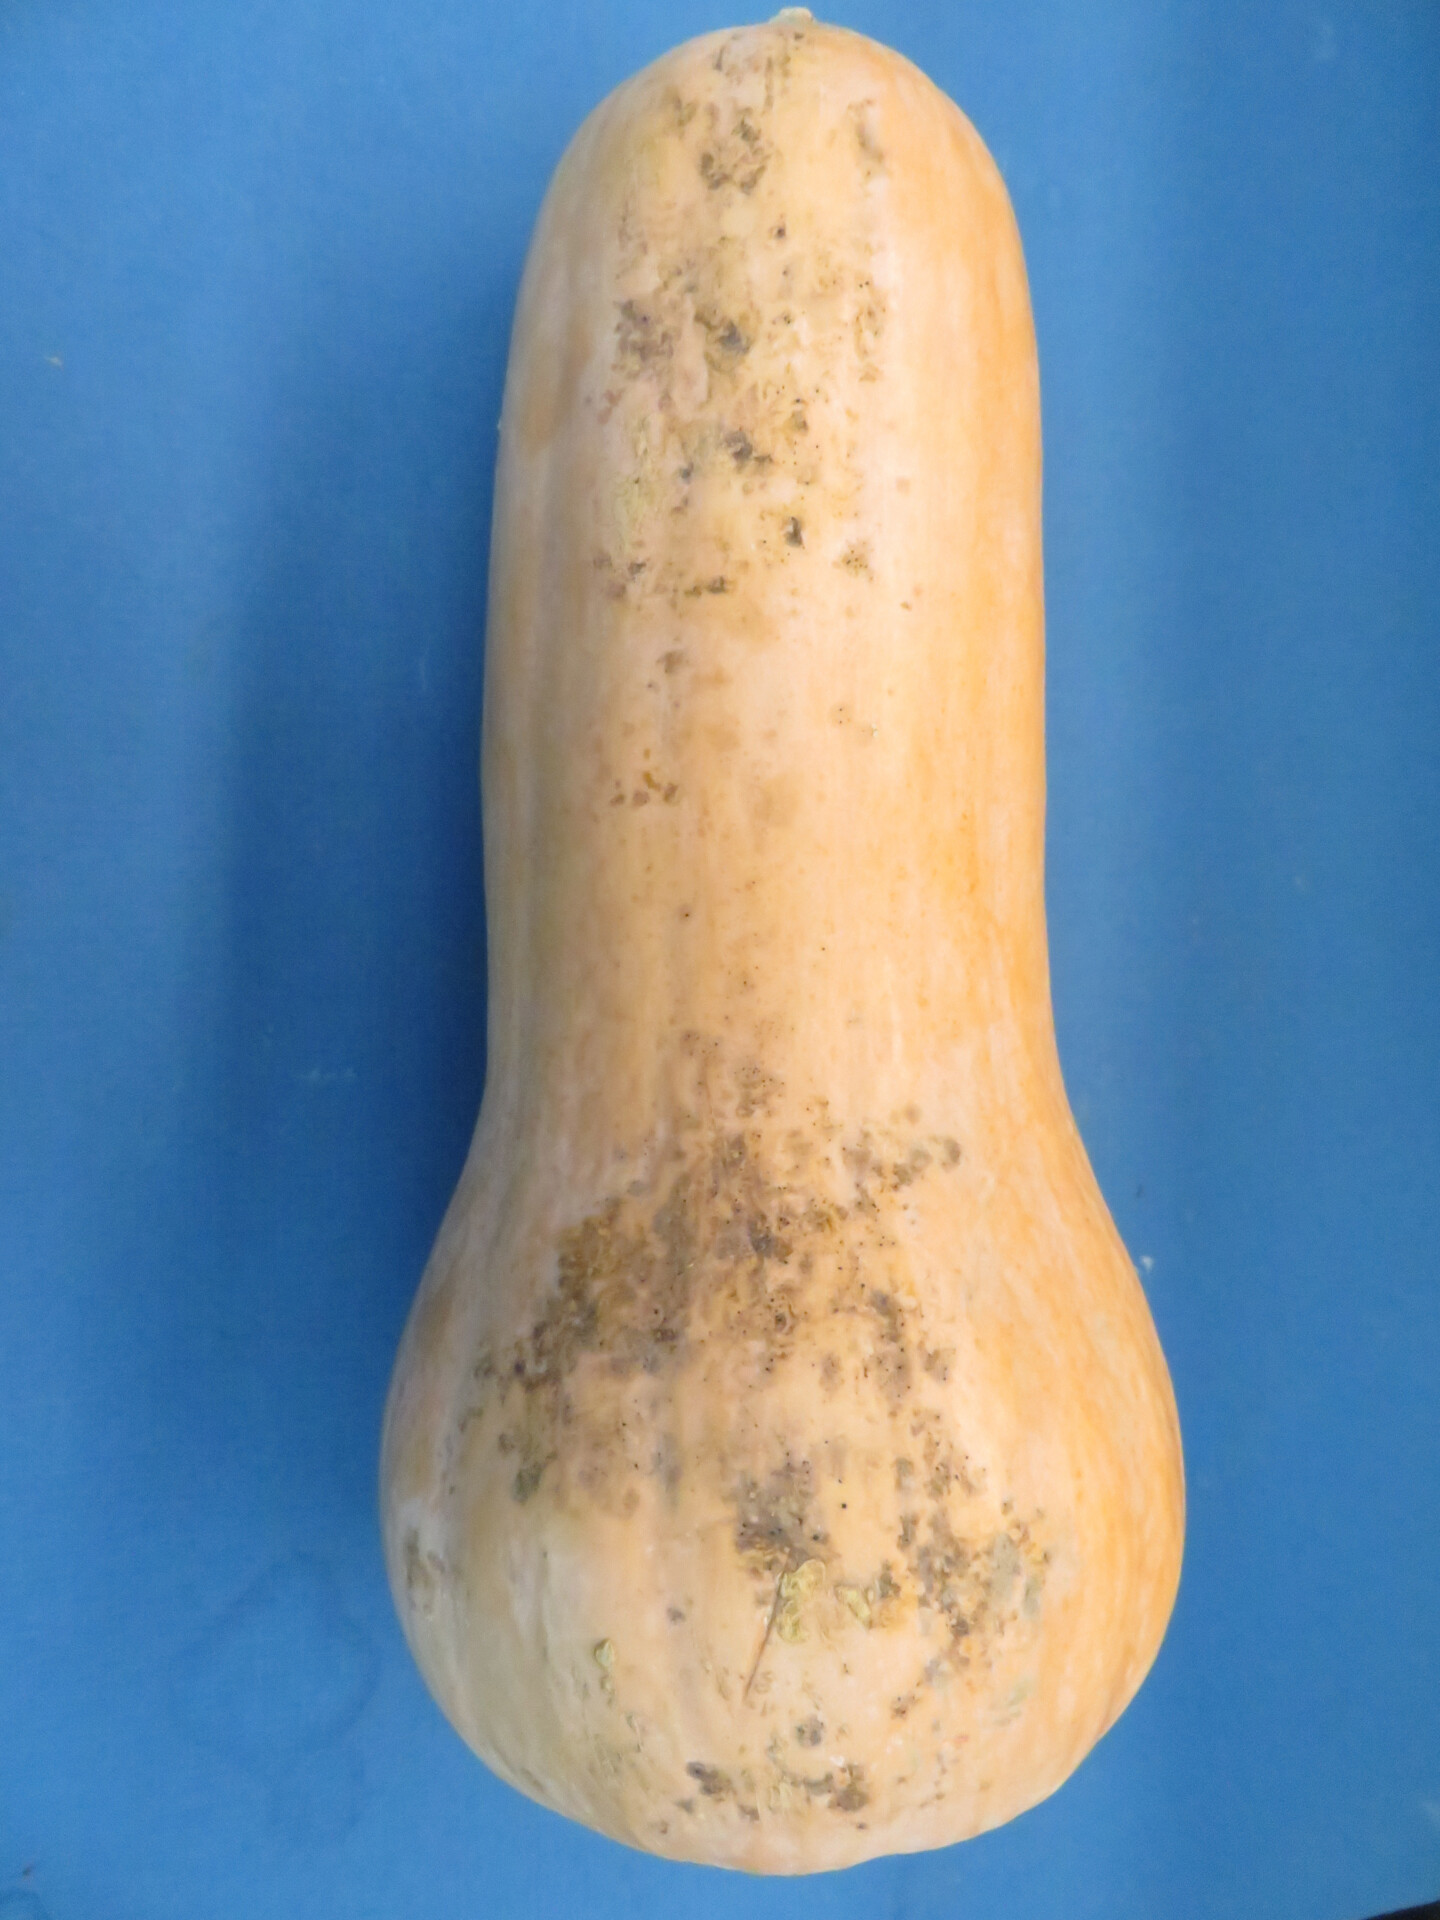 Figure 1. Sooty mold and fly speck on squash.